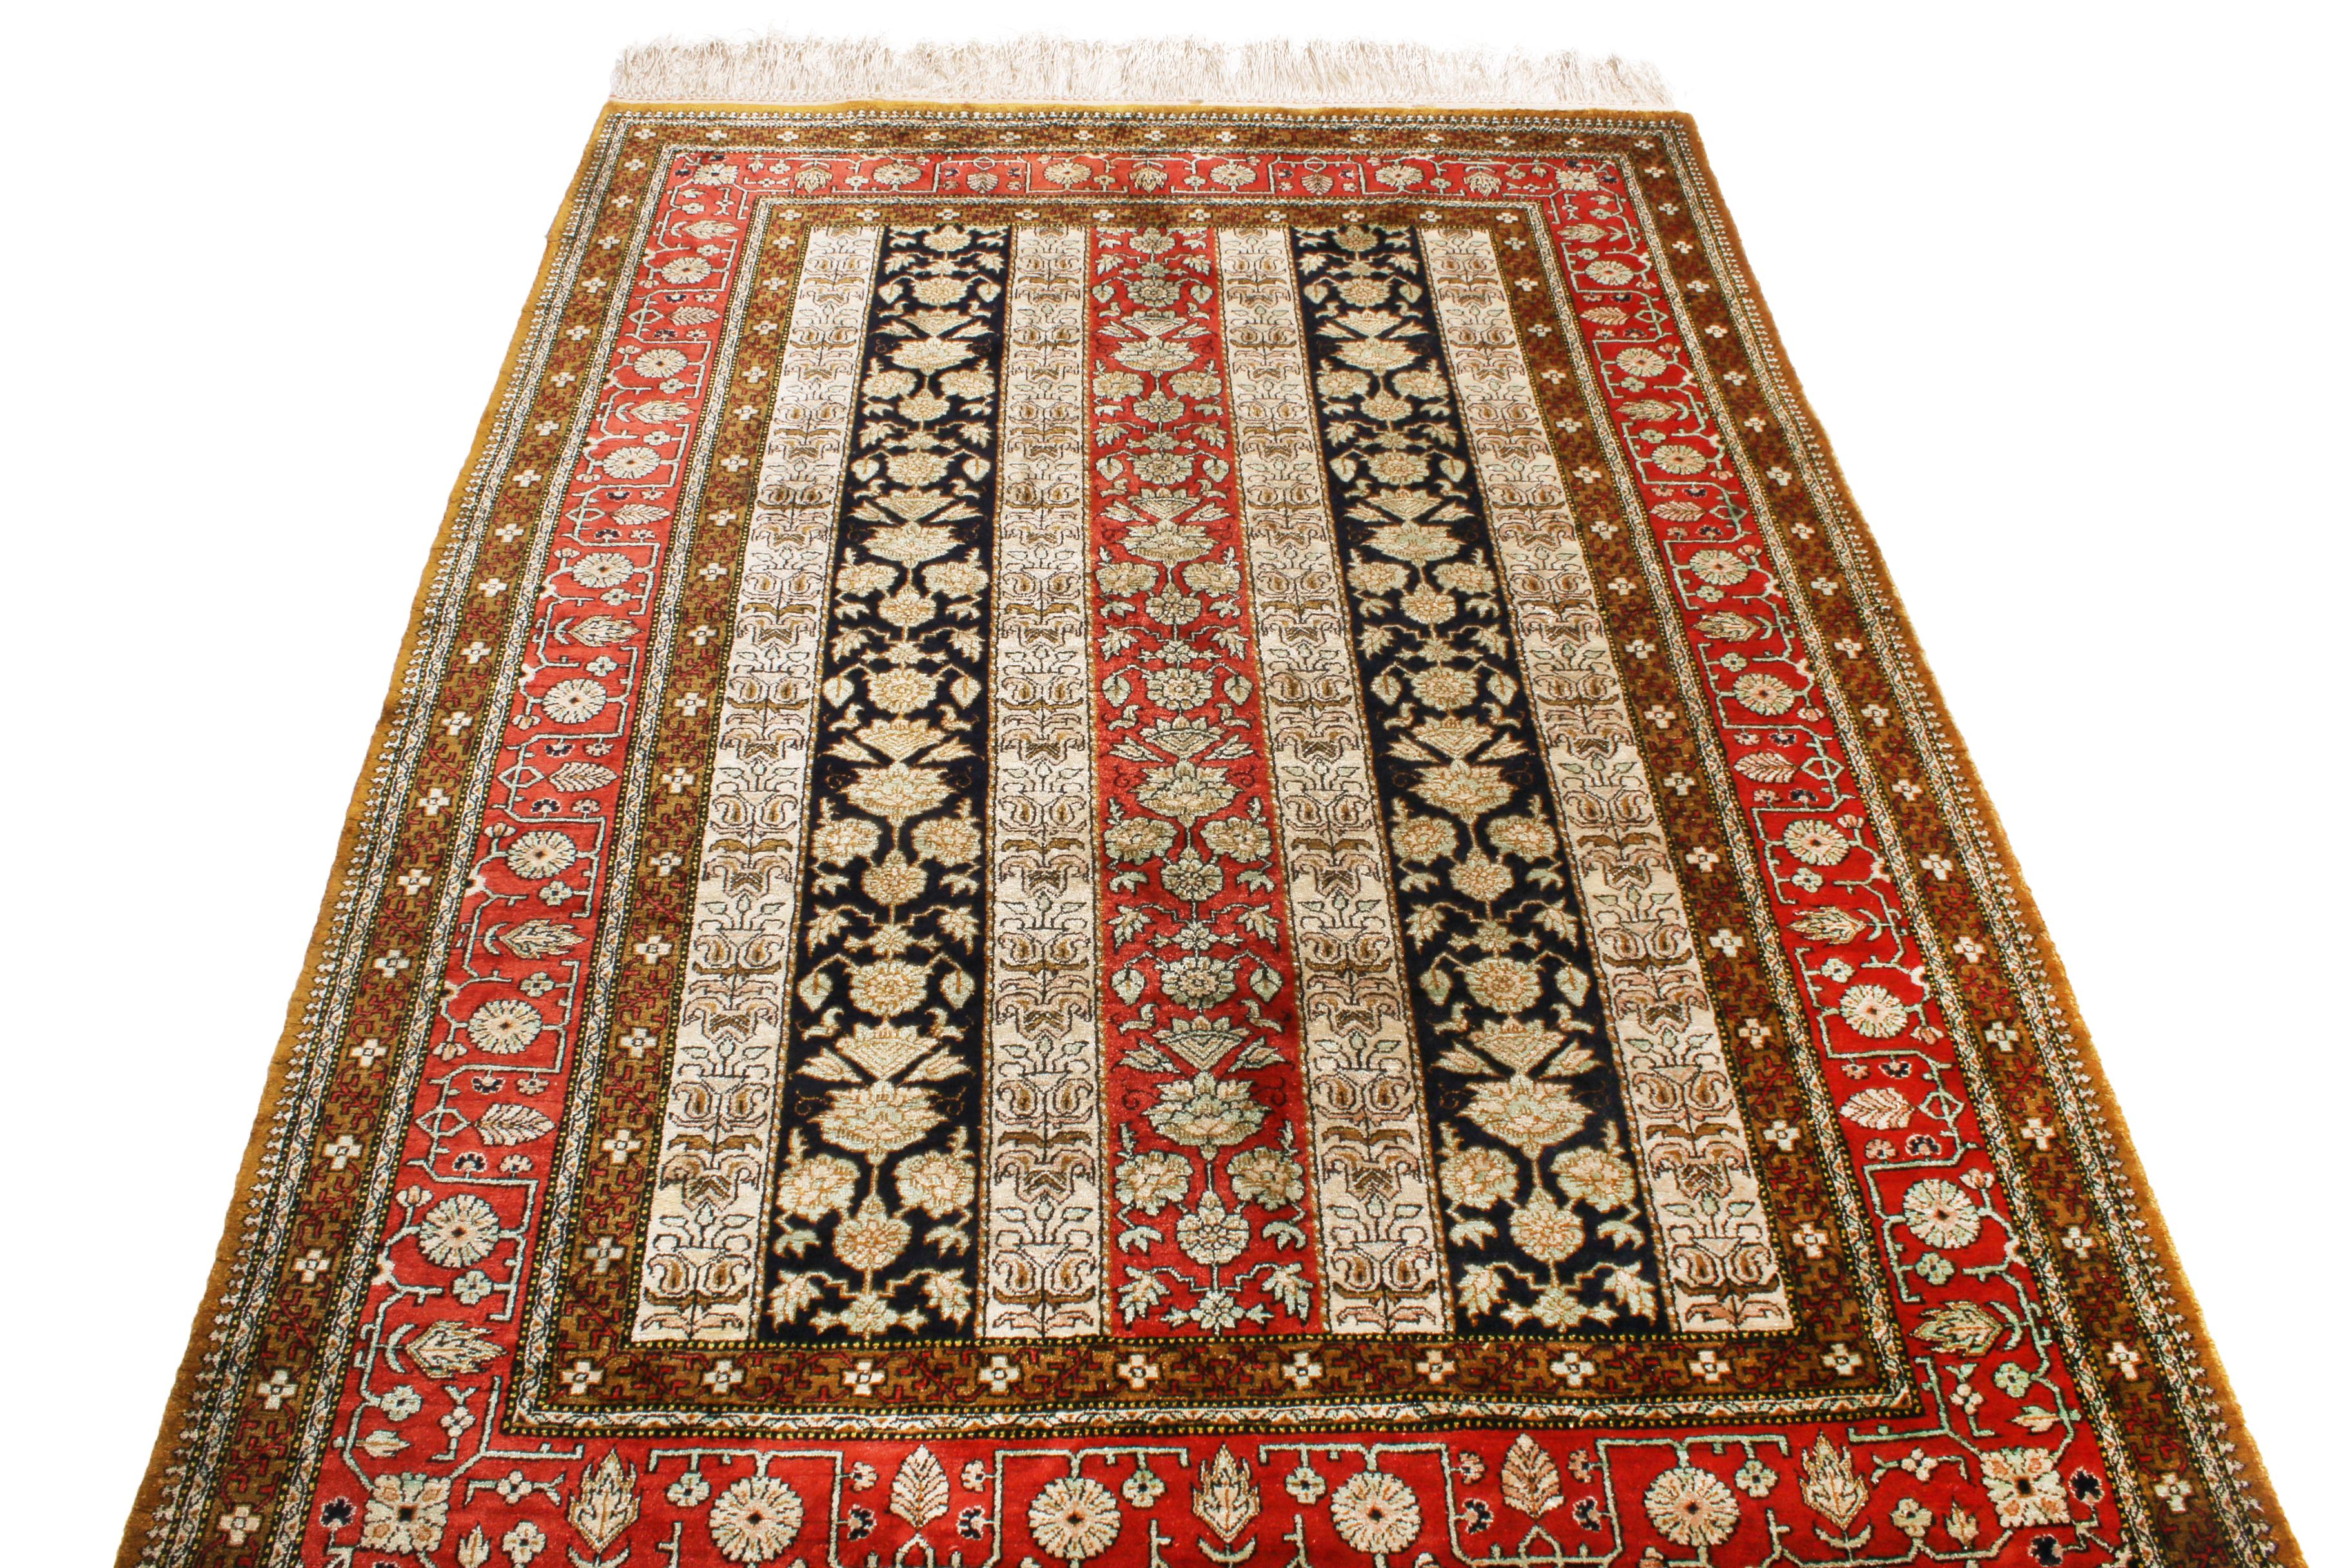 Originating from Persia between 1930-1950, this vintage Persian rug enjoys a unique Qum design with a series of intricate borders and column-based floral imagery complementary to its inviting size. Hand knotted in a soft, luminous silk, the sole